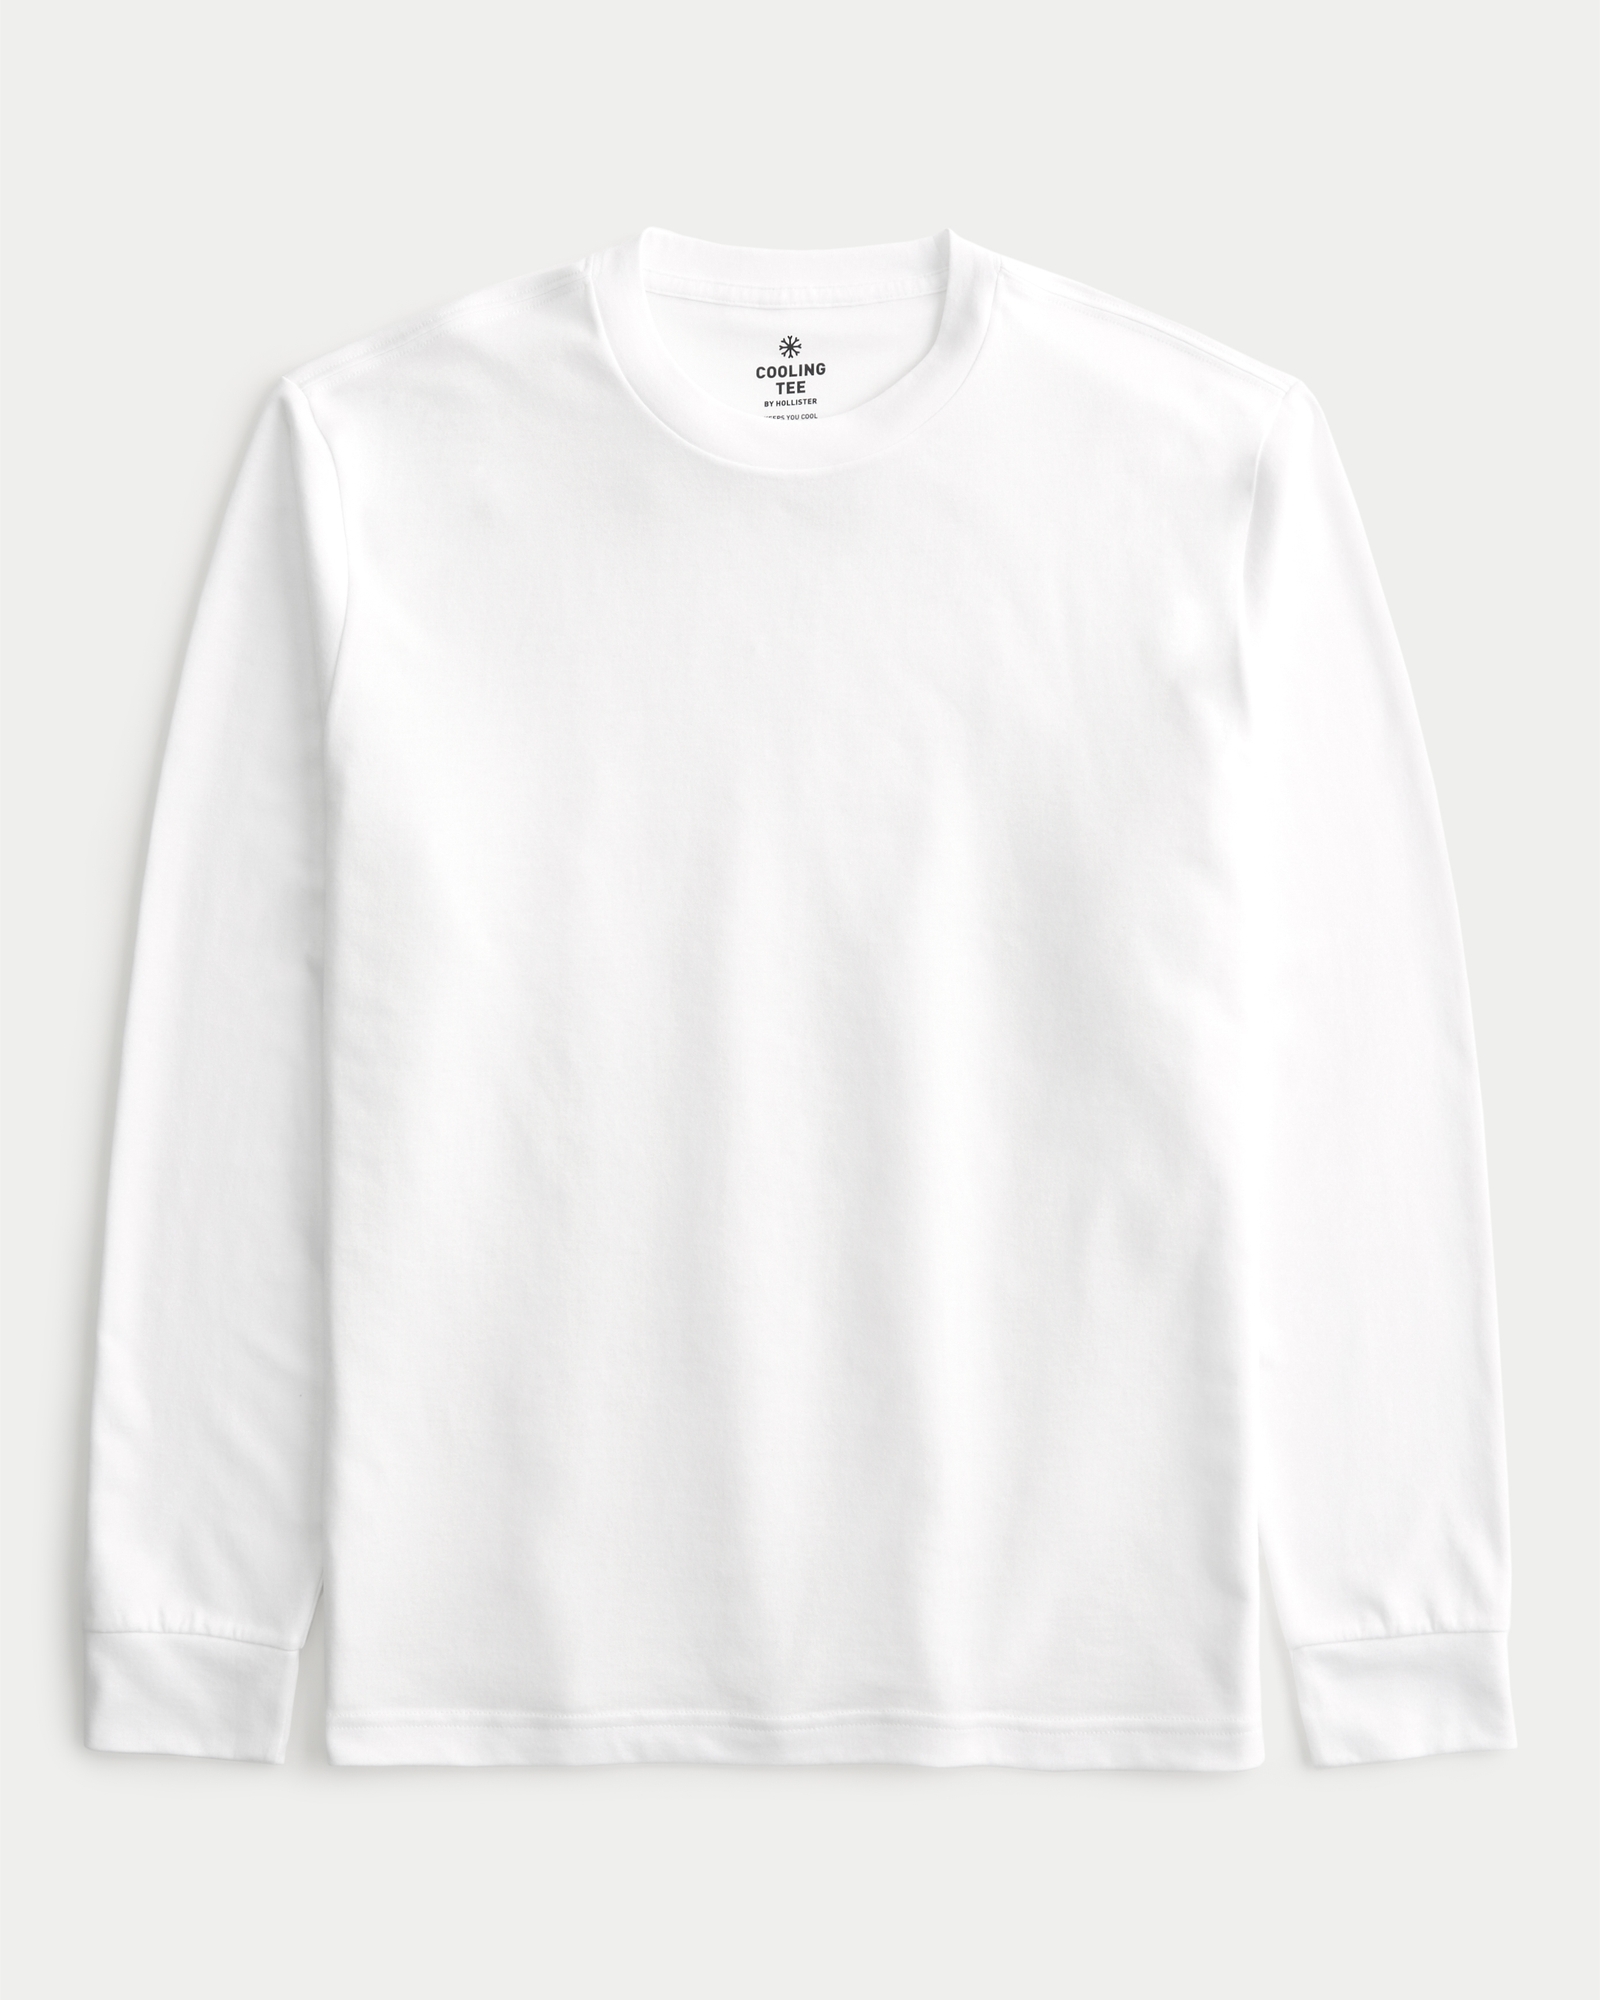 Men's Relaxed Long-Sleeve Cooling Tee